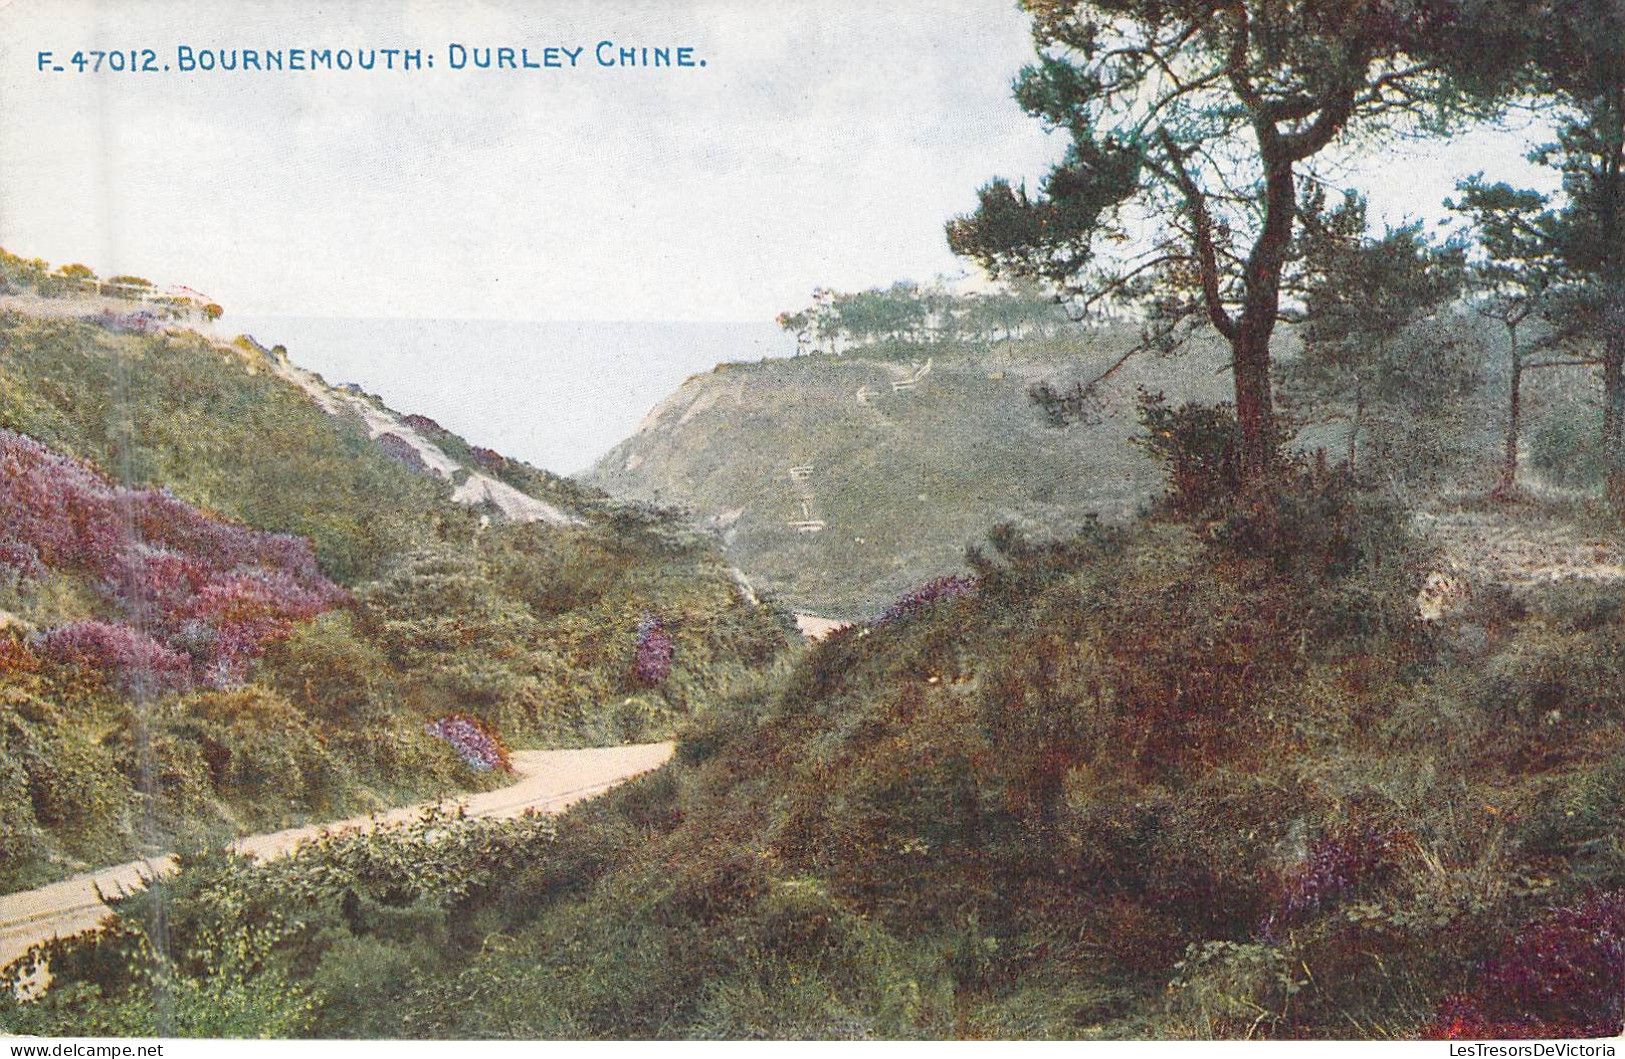 CHINE - BOURNEMOUTH - Durley Chine - Carte Postale Ancienne - China